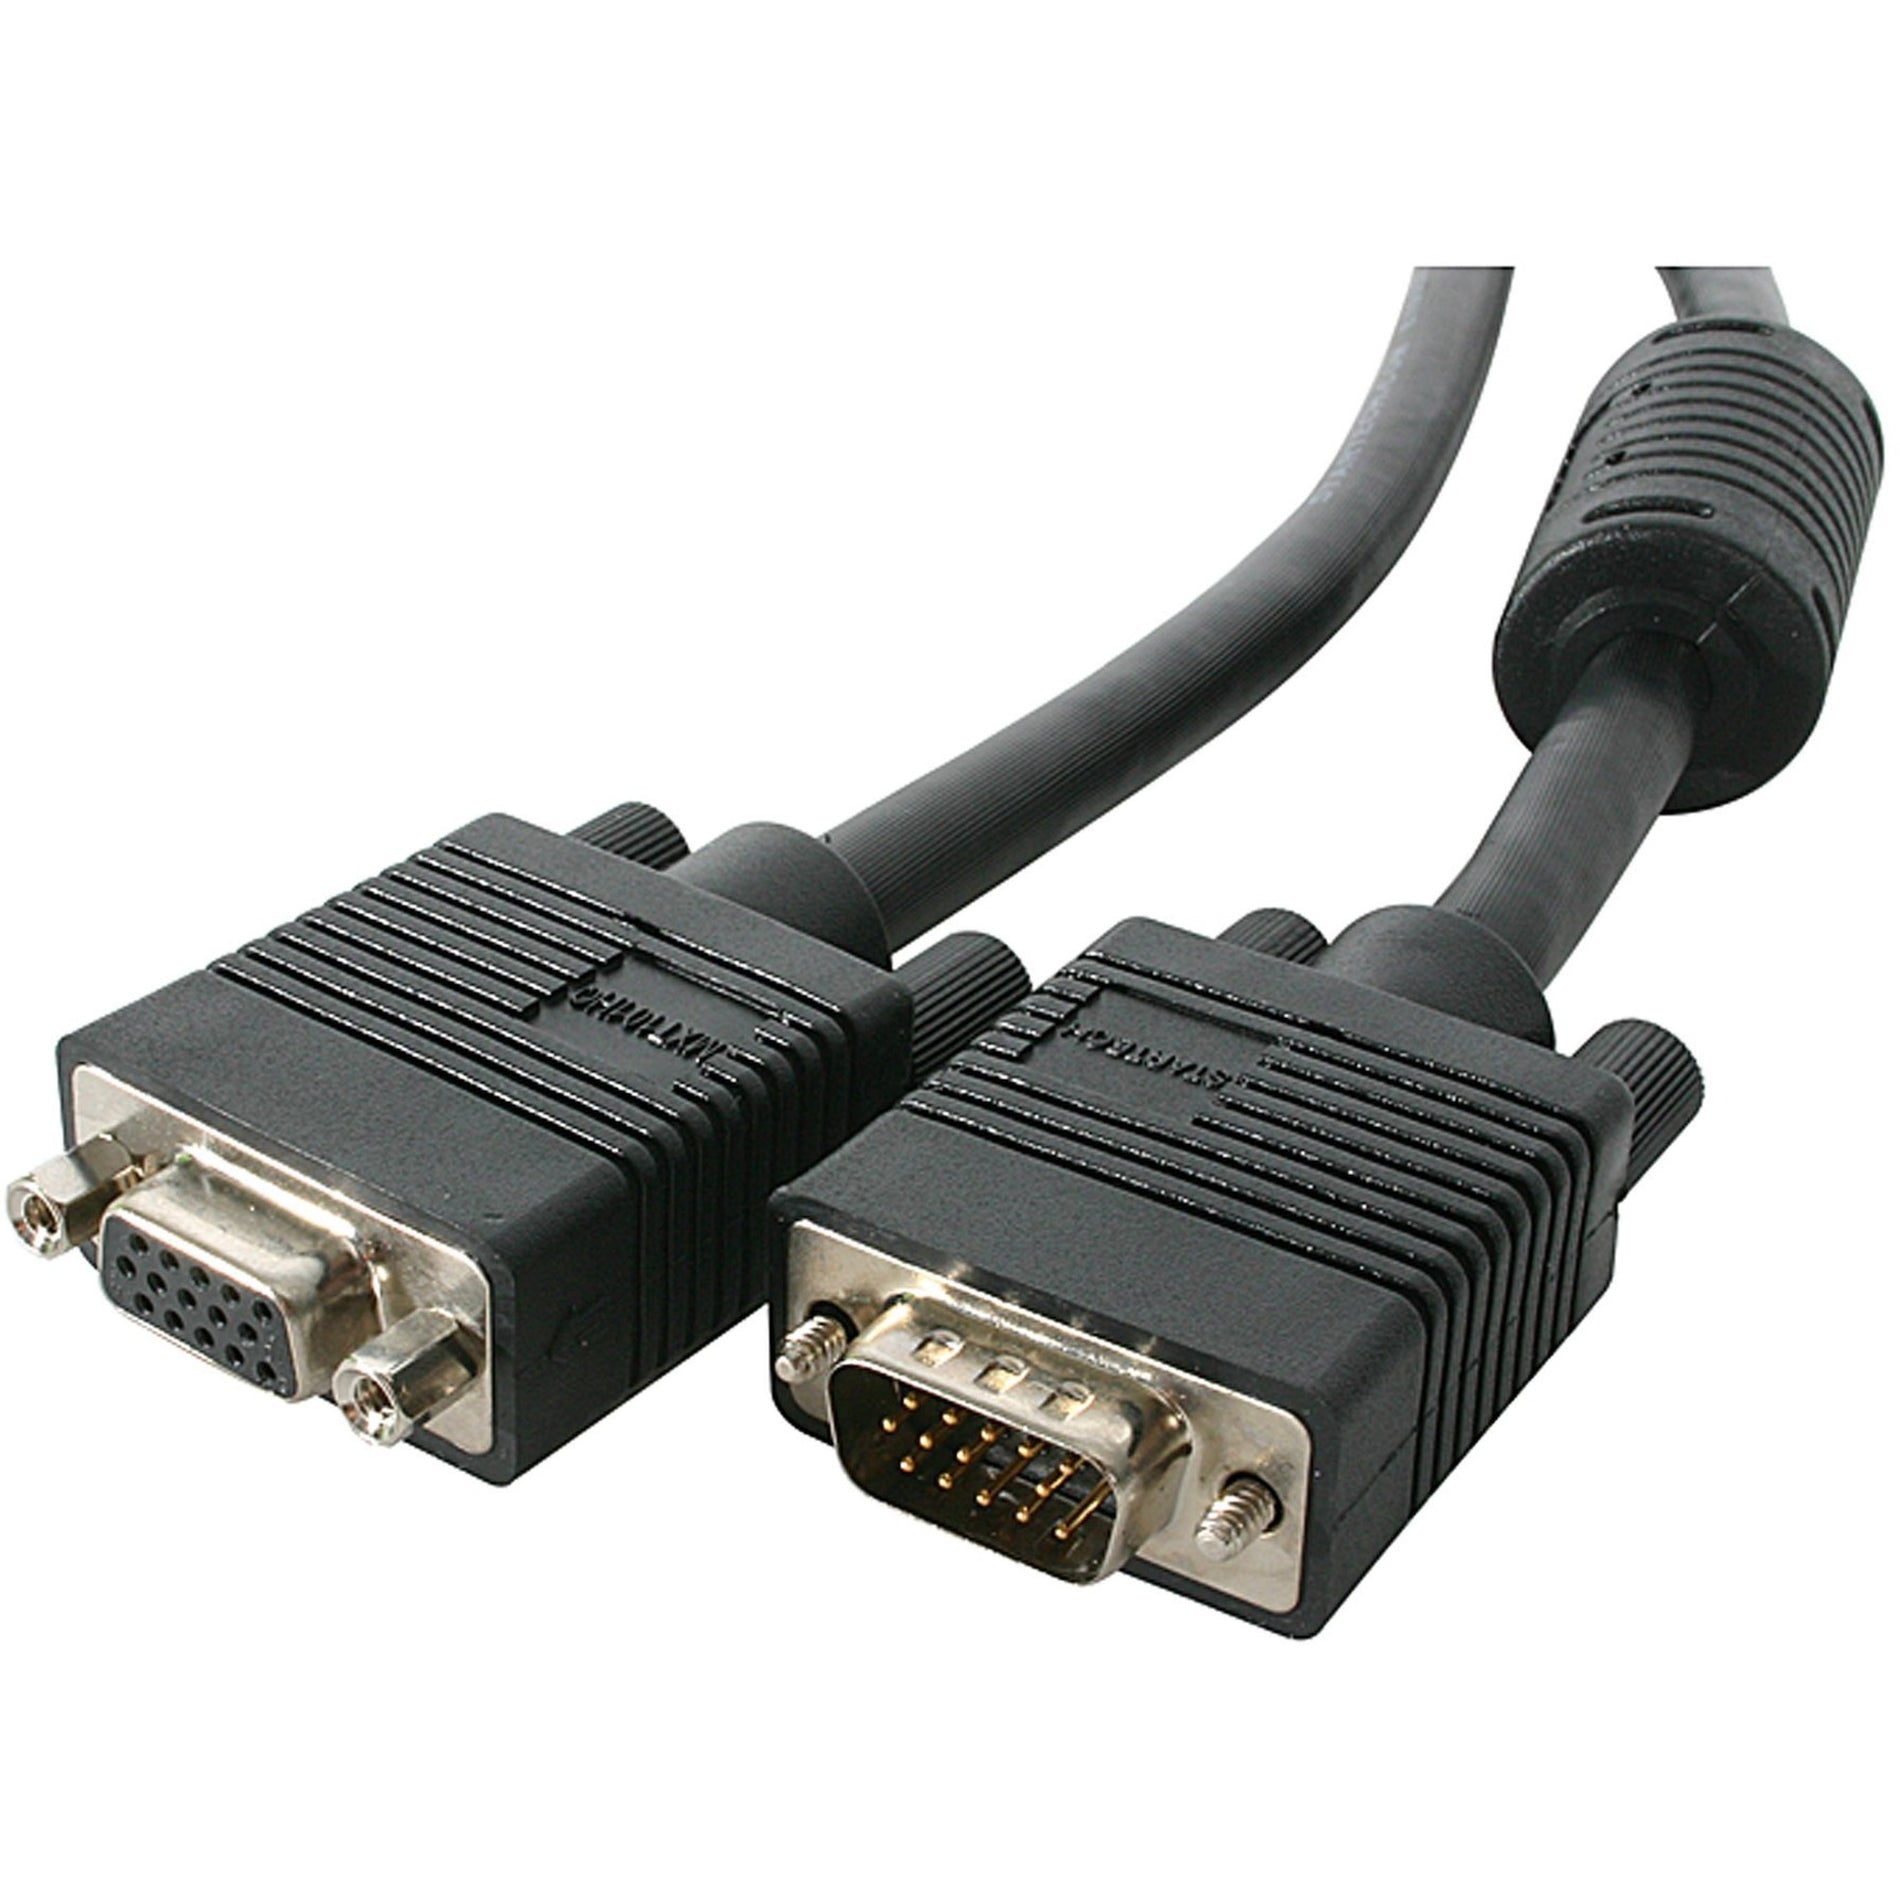 StarTech.com MXT101HQ35 Coax SVGA Monitor Extension Cable, 35 ft - High-Resolution VGA Video Cable